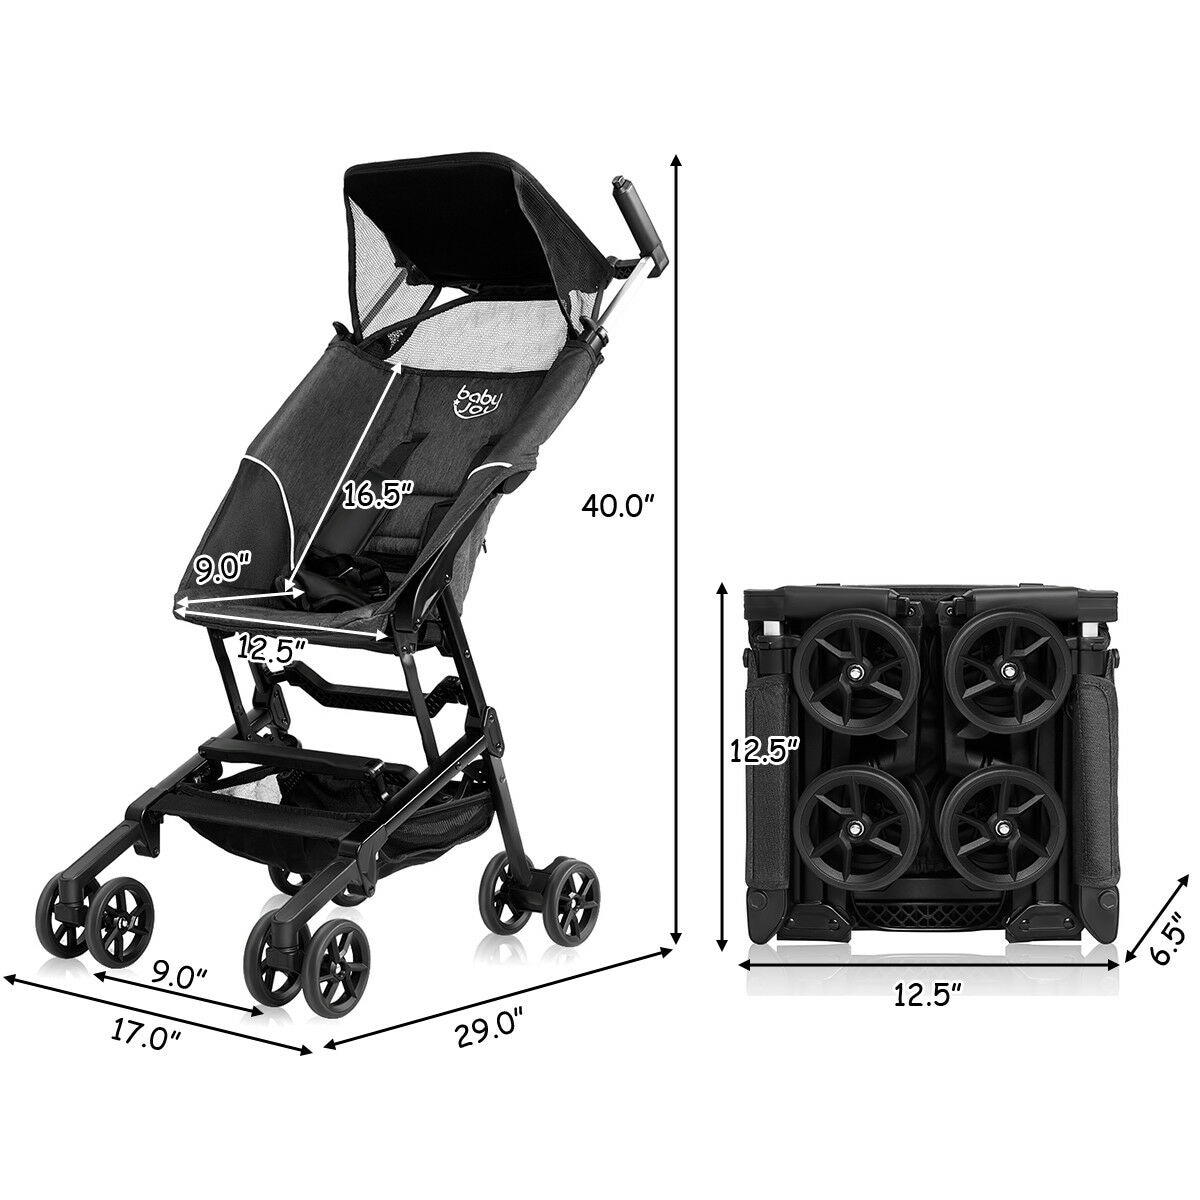 moweo compact fly stroller